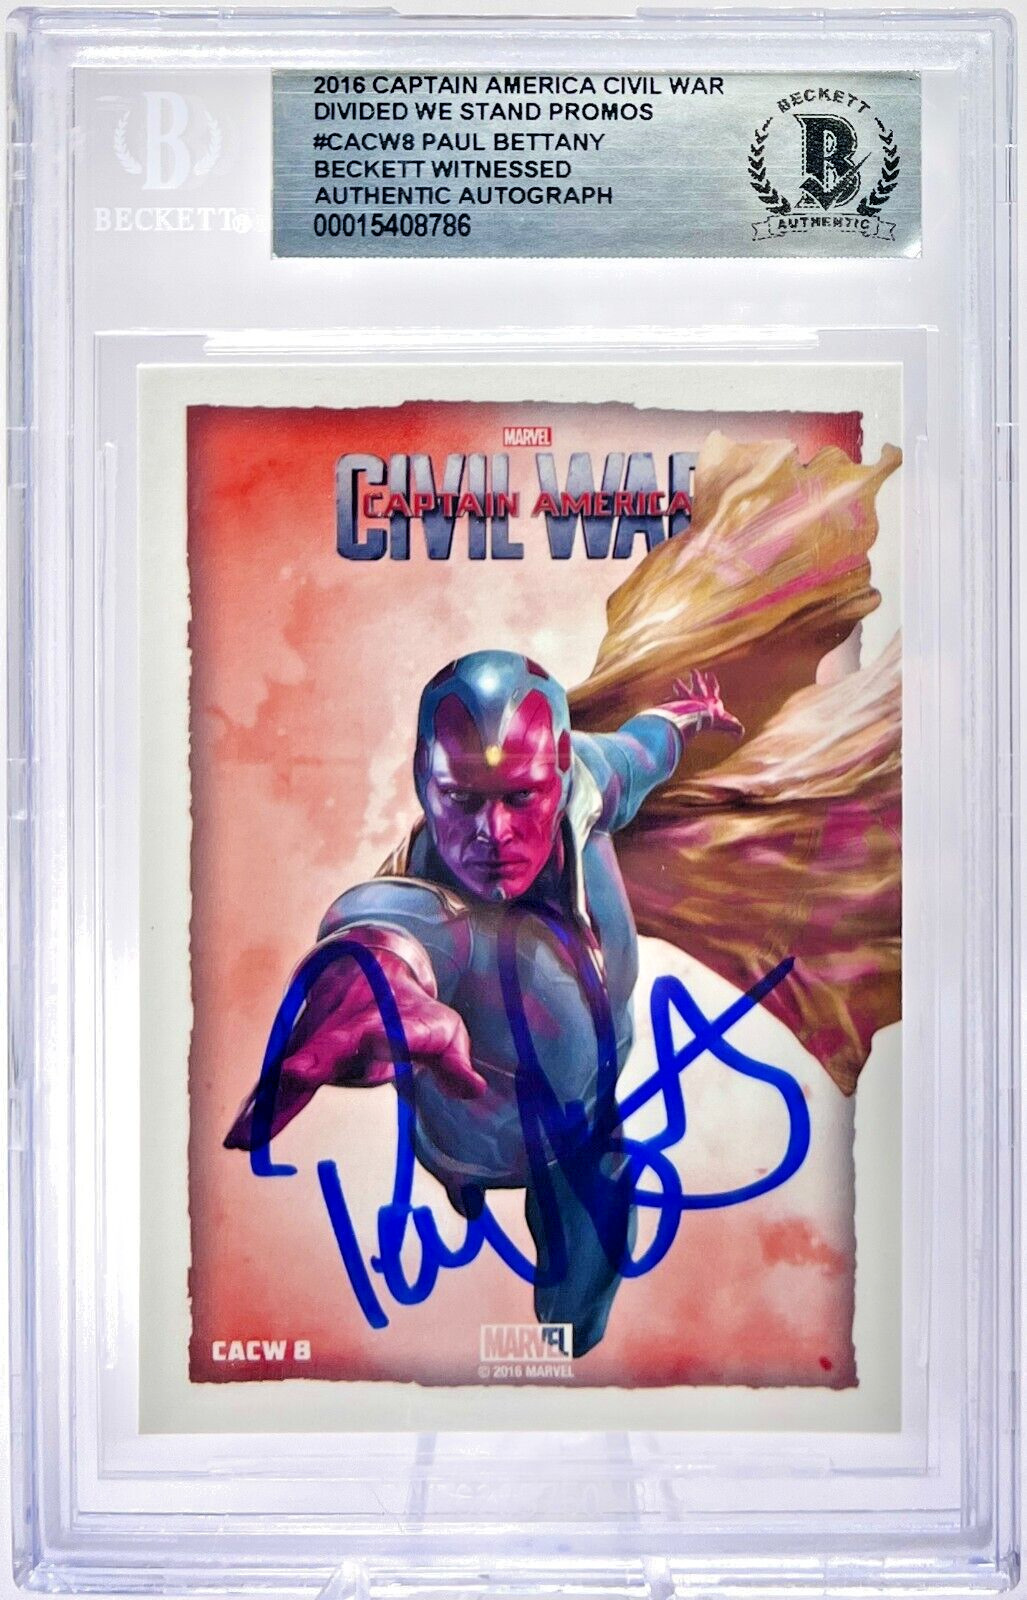 2016 Captain America Civil War Paul Bettany Auto #CACW8 Beckett Graded Witnessed